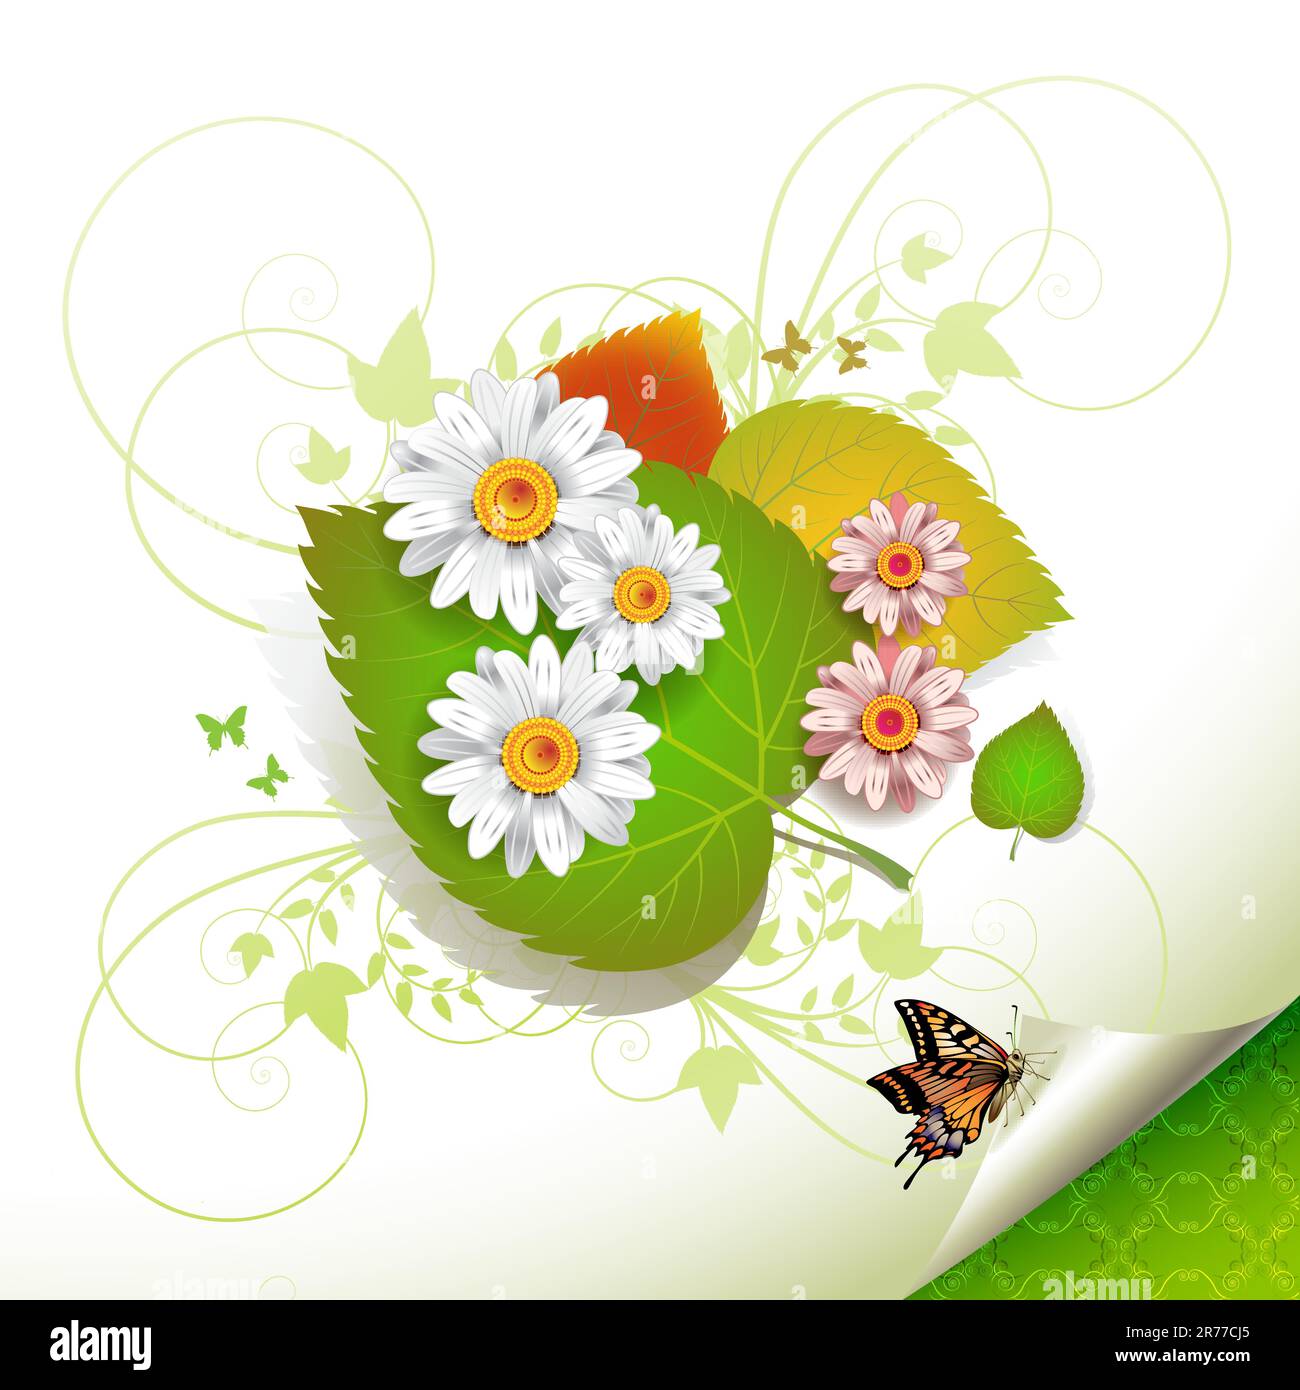 Flowers over leaves and butterflies Stock Vector